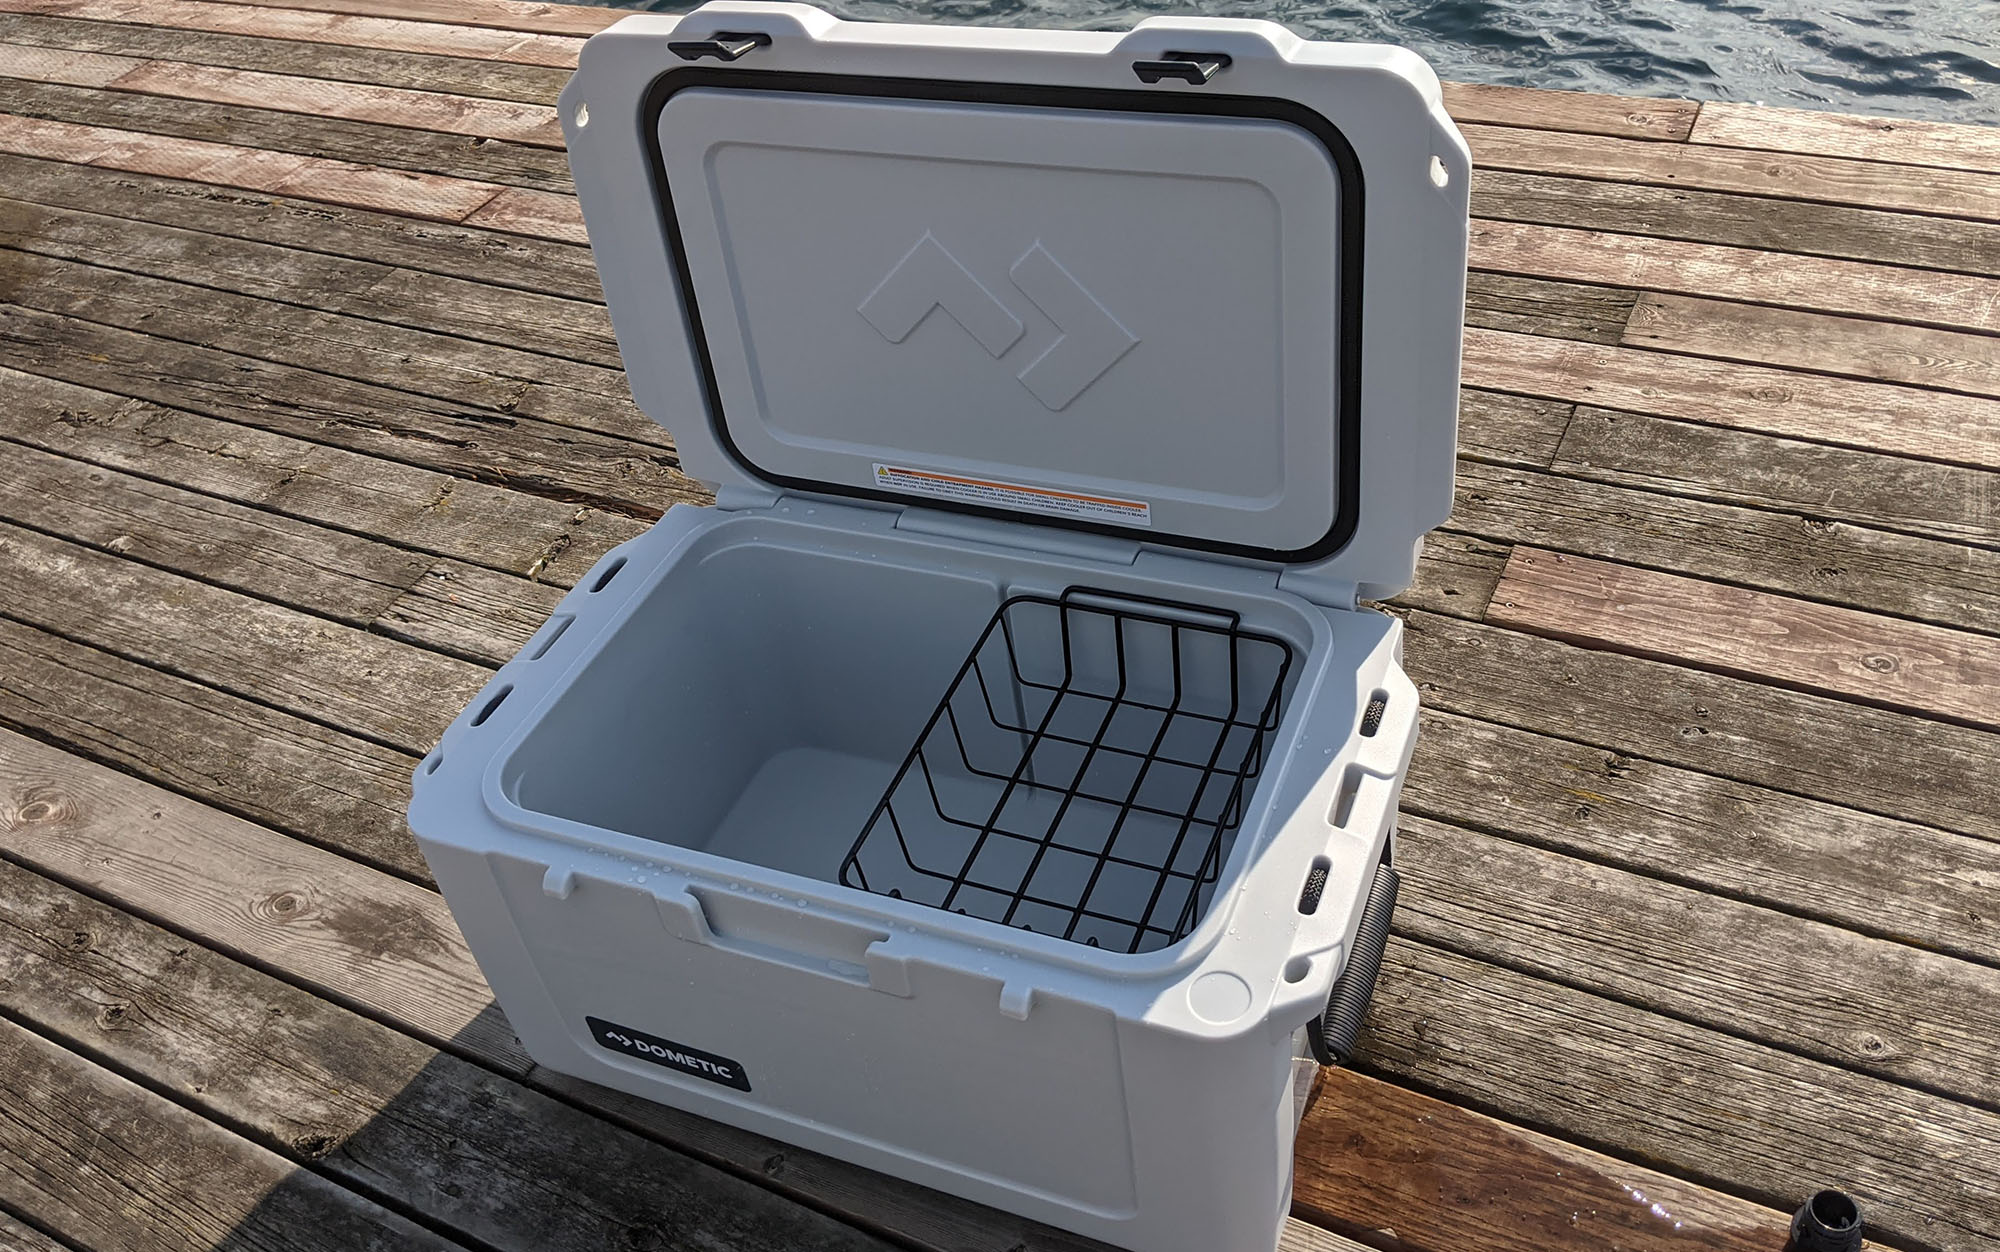 Dometic Patrol cooler sits open on dock.